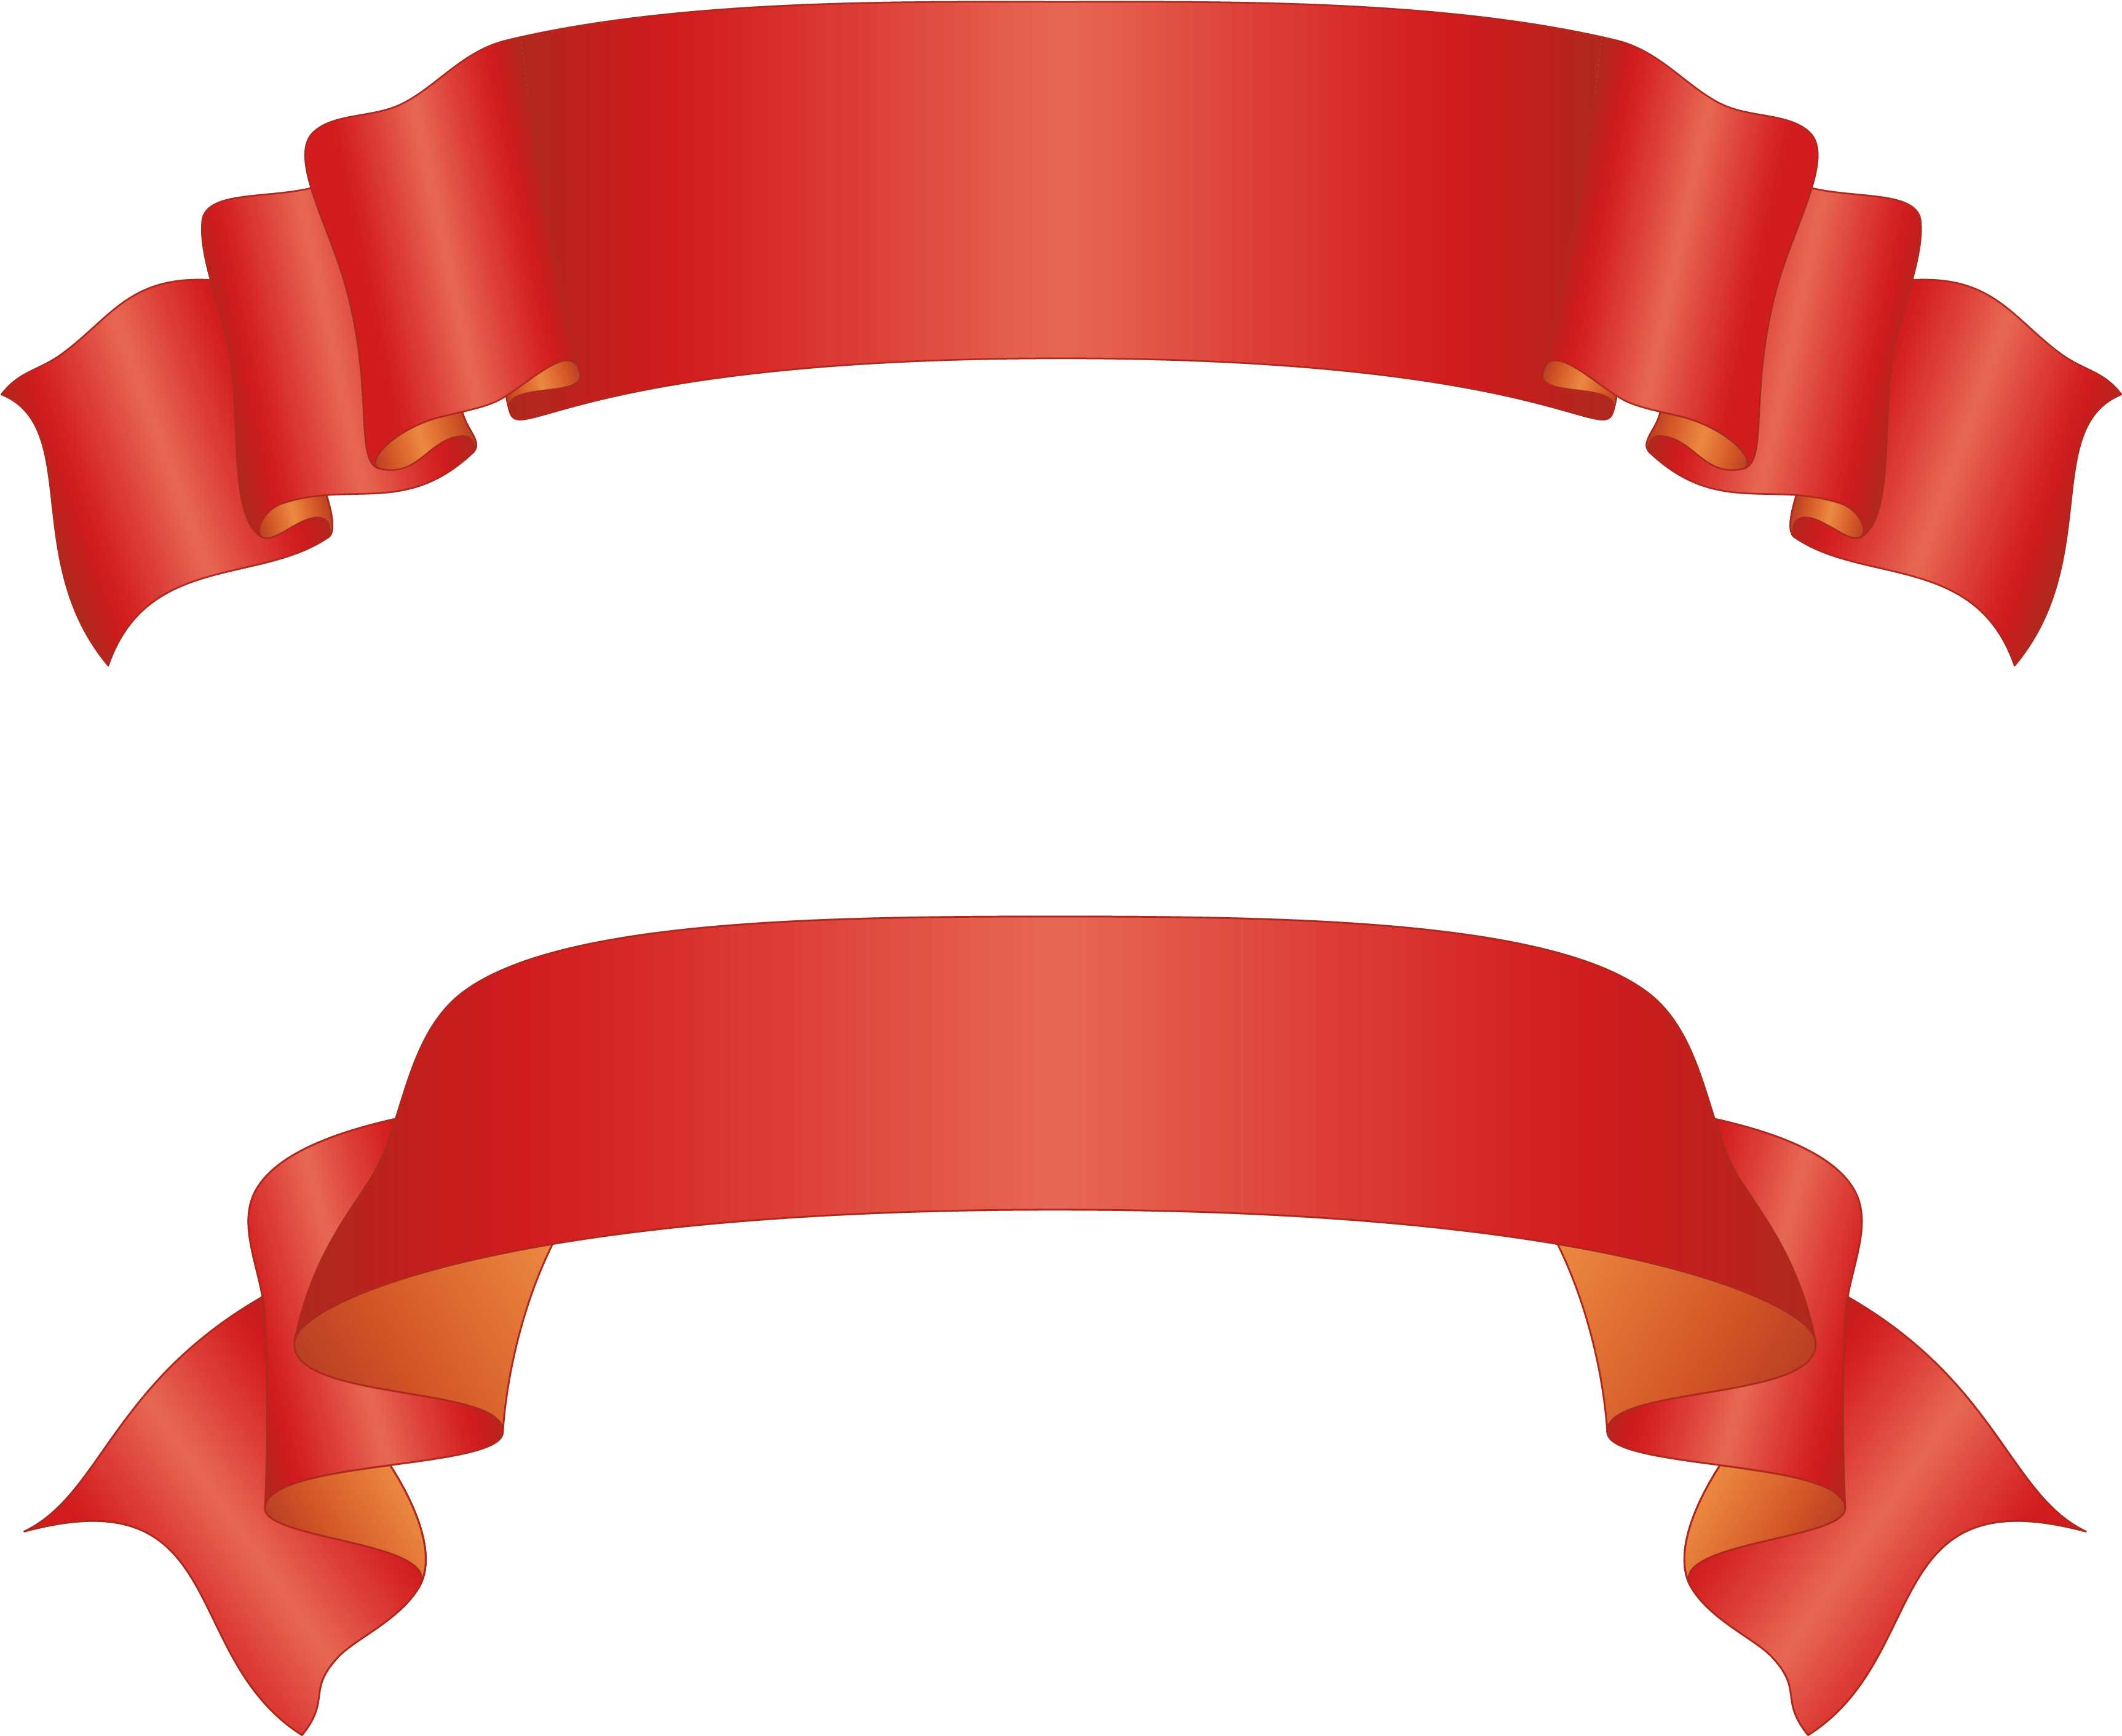 Curved - Red Ribbon Banner Transparent Background (3718x3228)